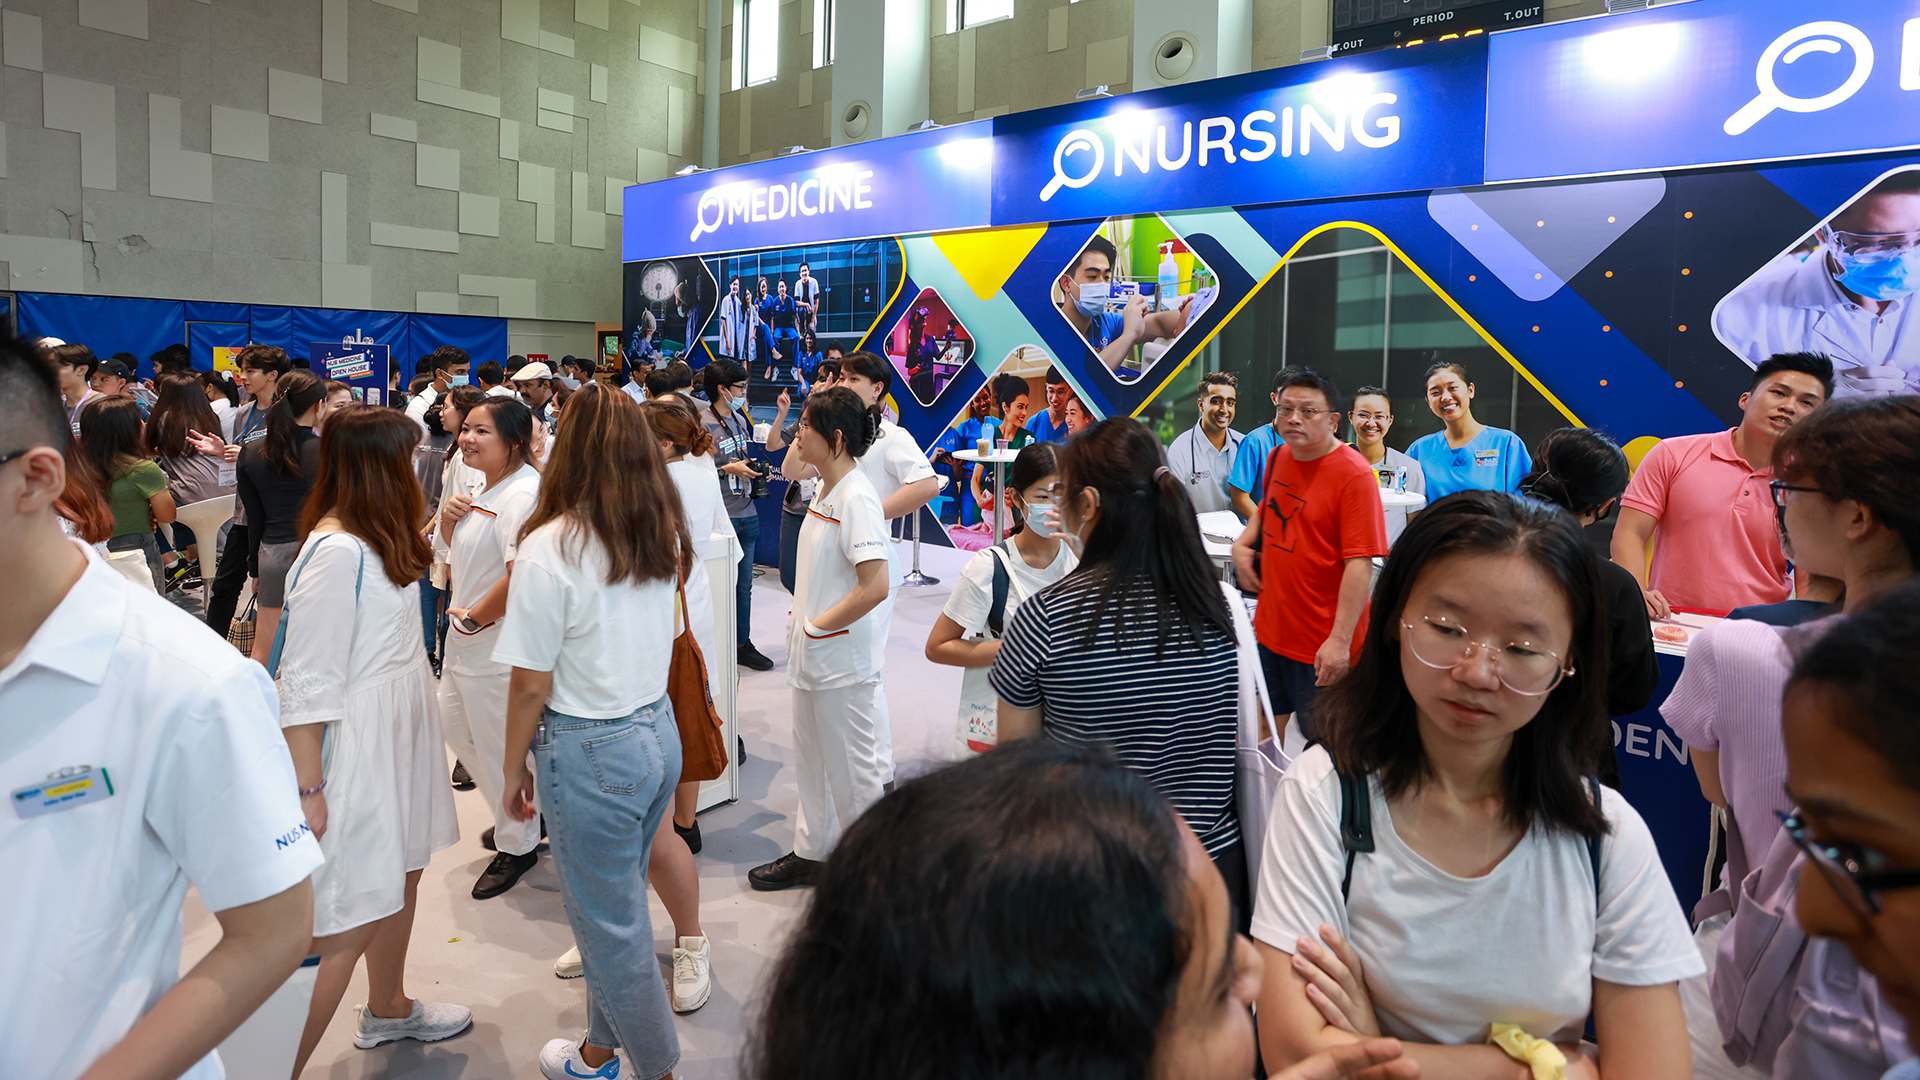 Visitors to the booths got the chance to interact with professors and current students to find out more about the courses they were interested in.